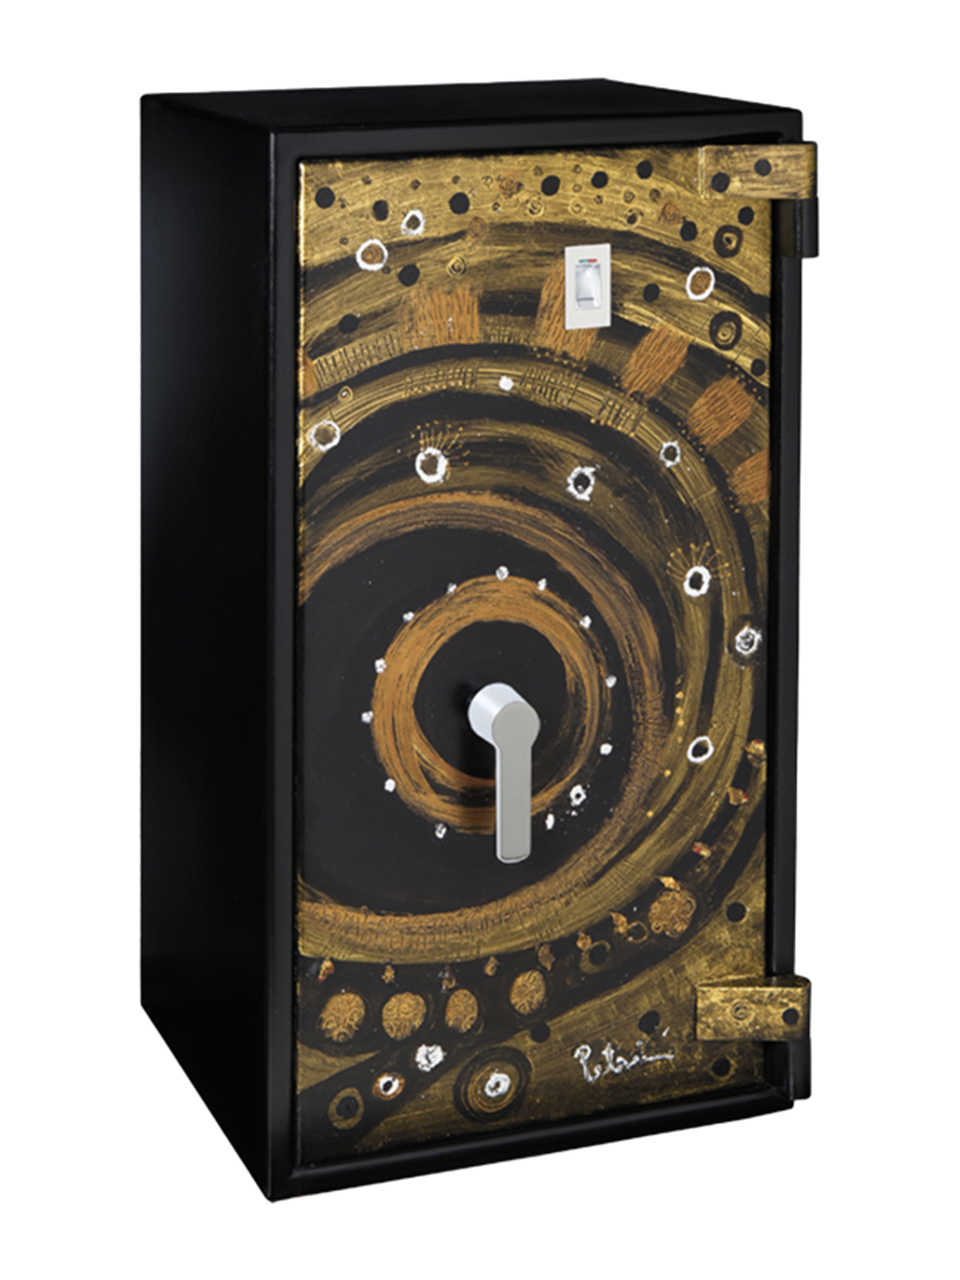 Unique paintings of safes: Elegance in gold and black